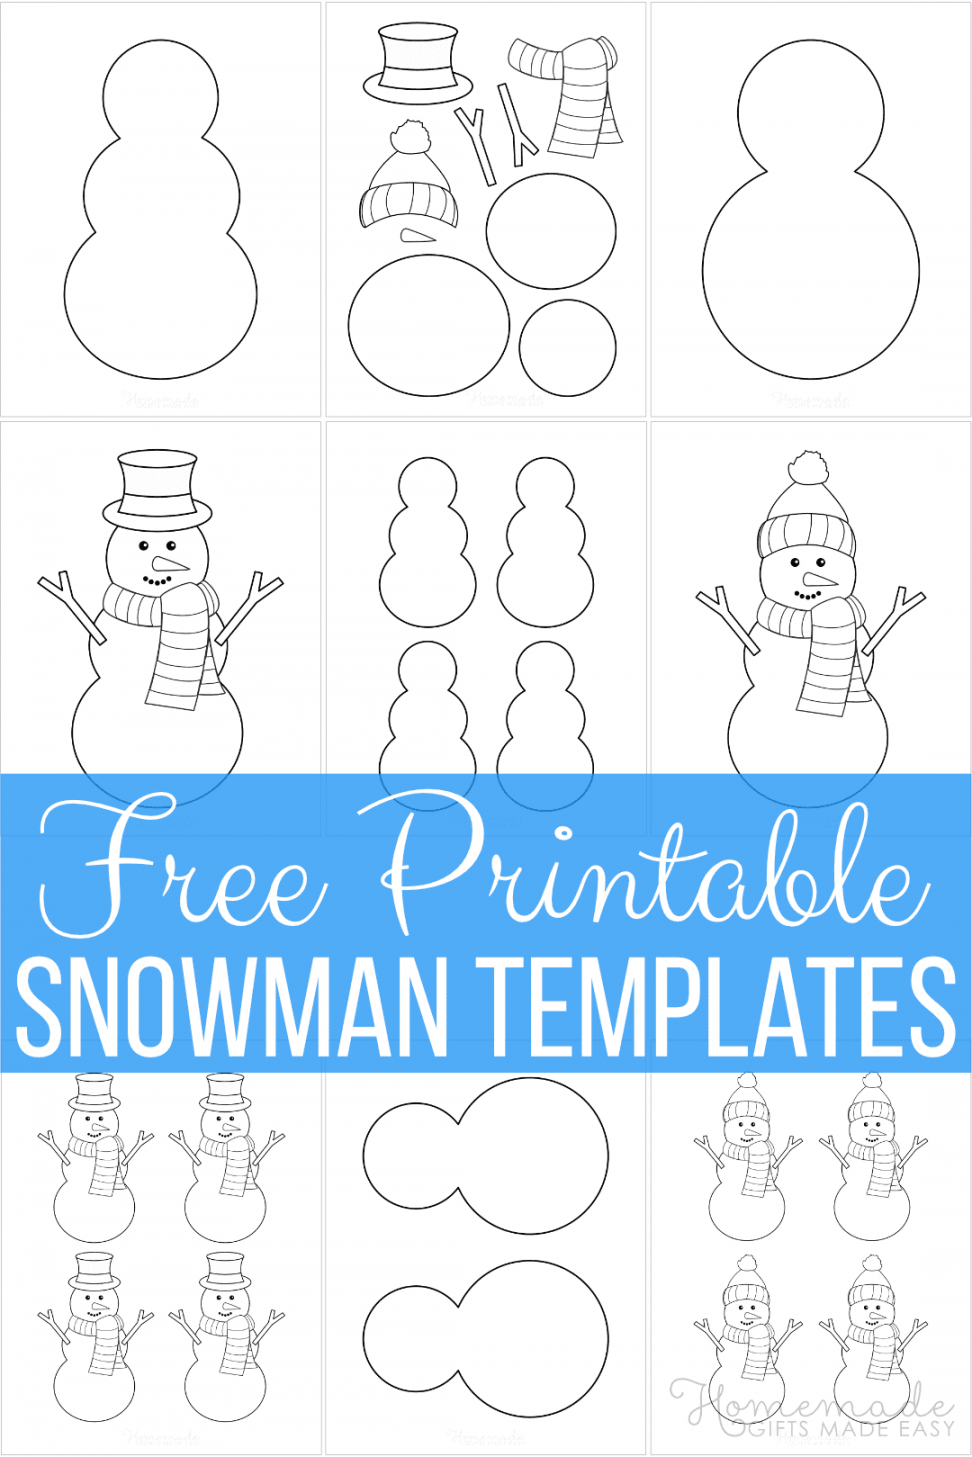 Free Printable Snowman Templates for Crafts - FREE Printables - Snowman Template Printable Free